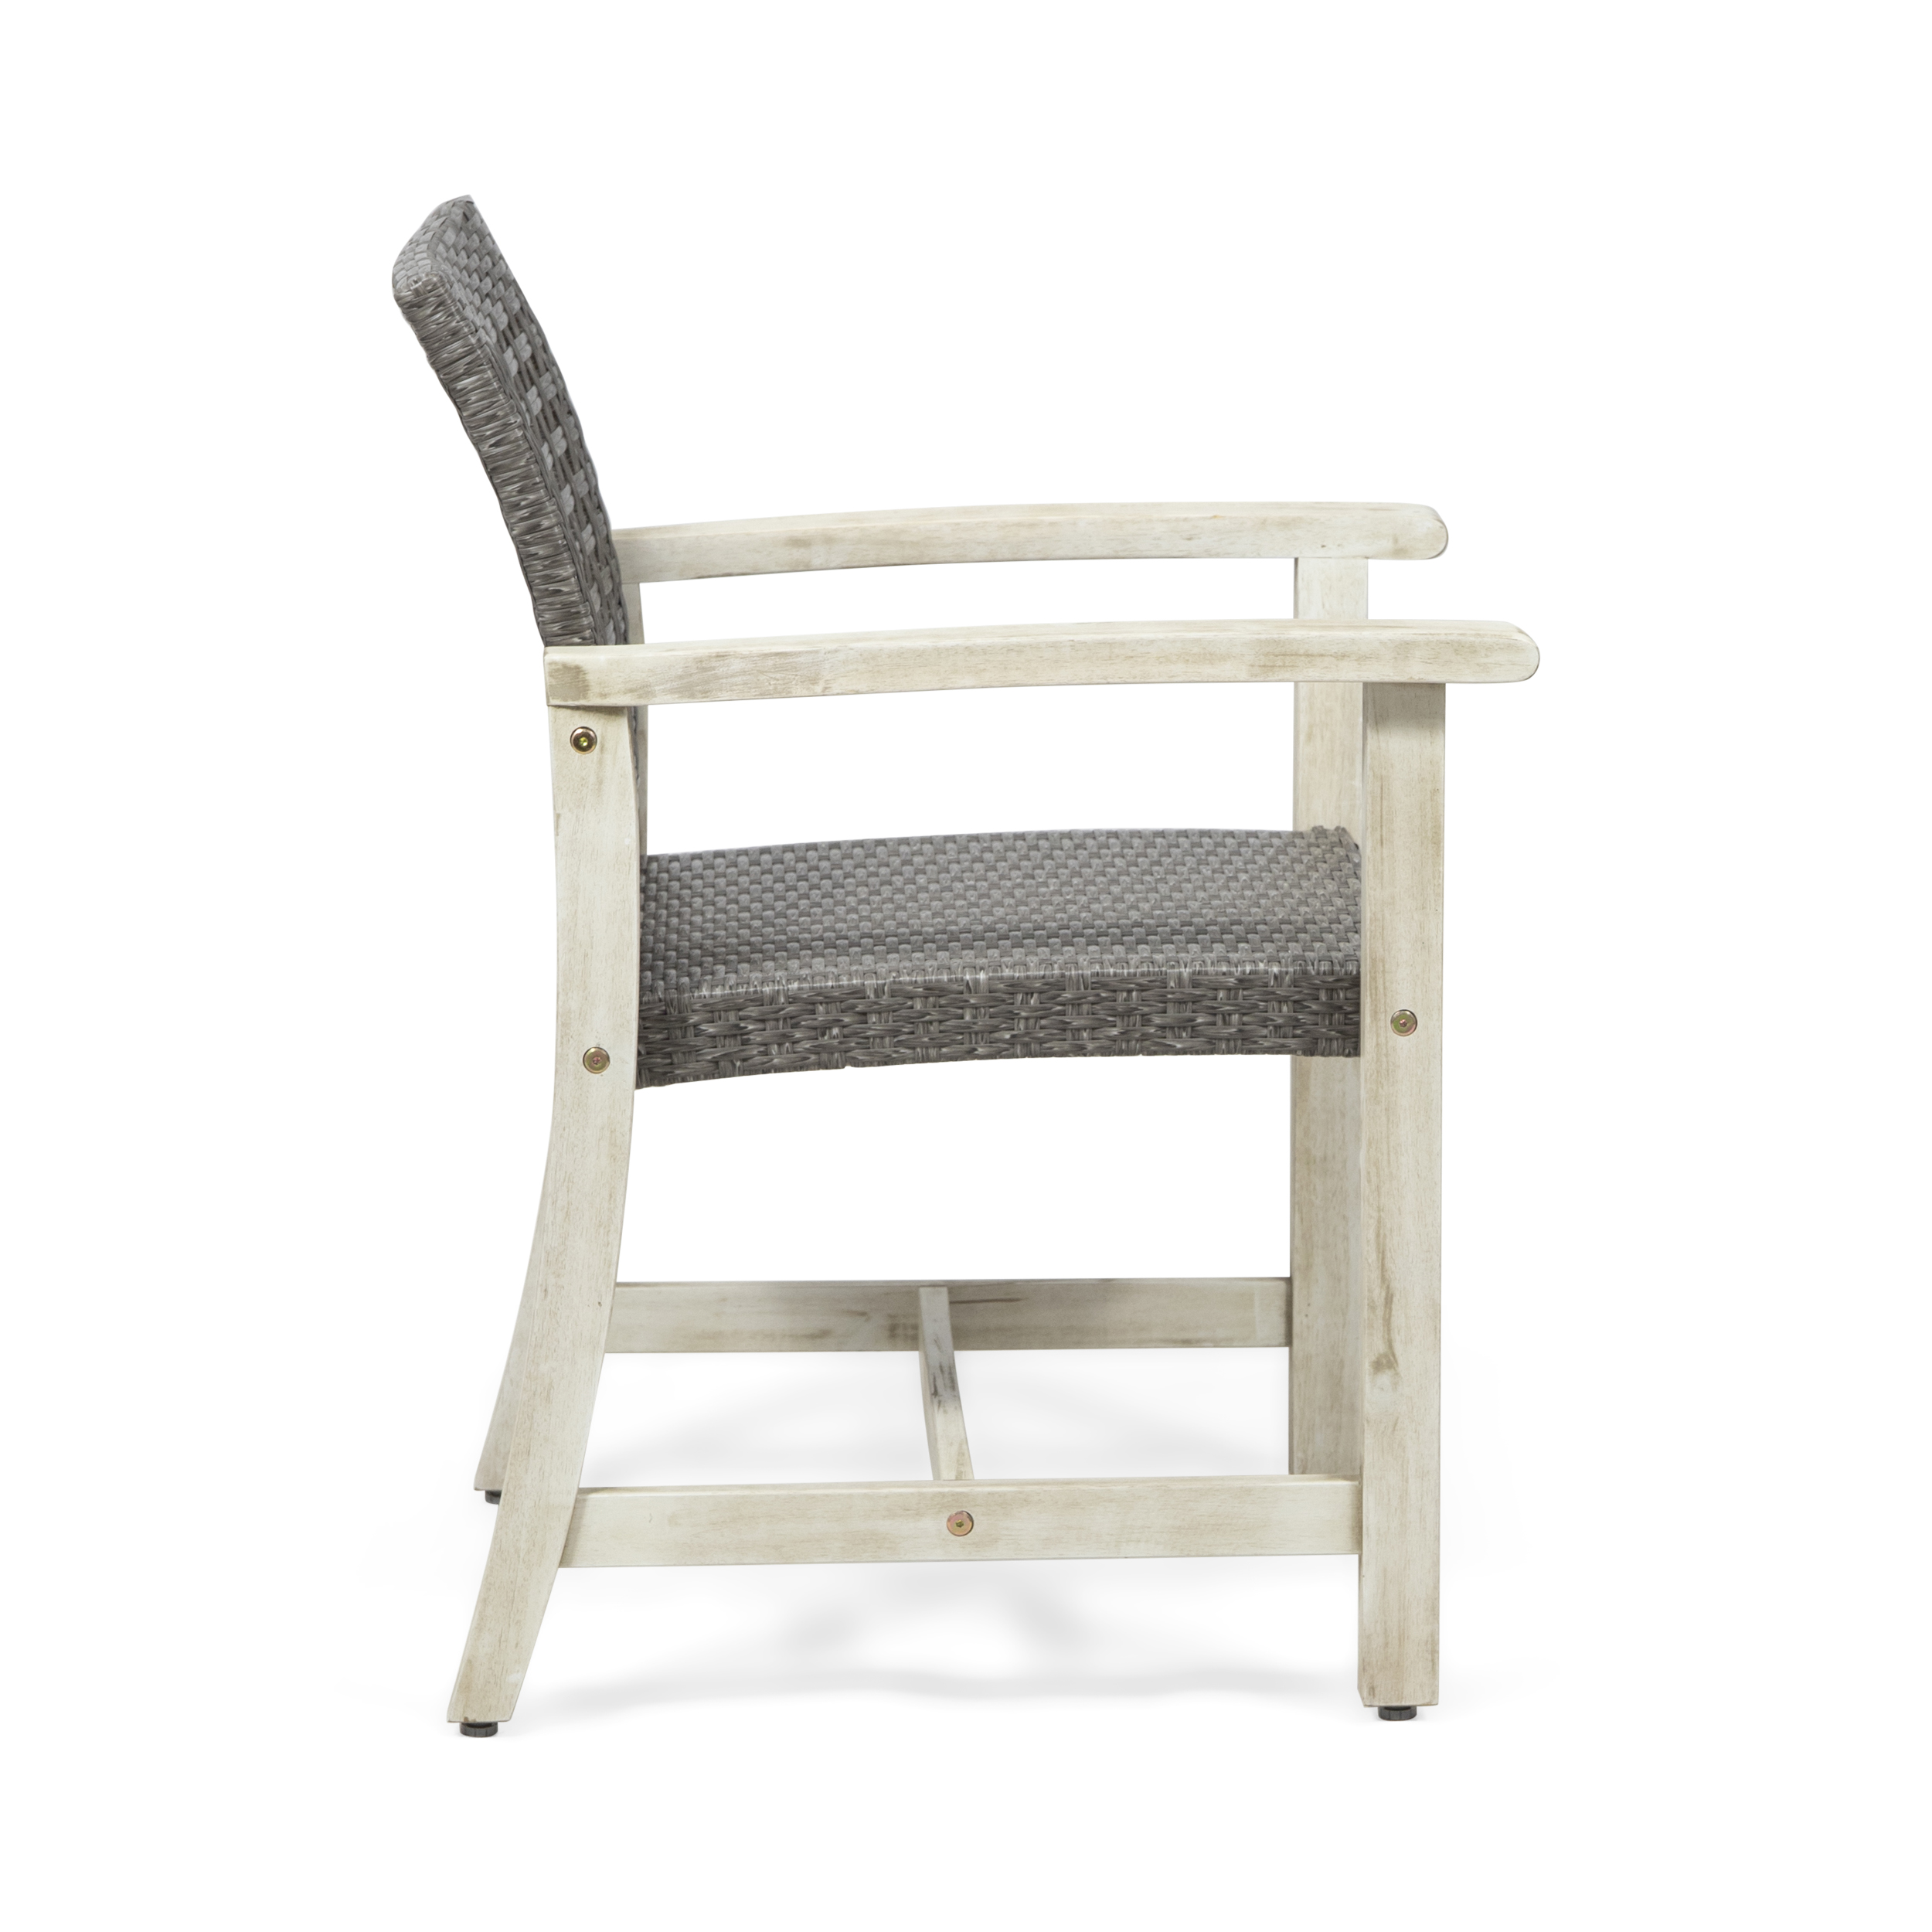 GDF Studio Beacher Outdoor Acacia Wood and Wicker Dining Chair (Set of 2), Light Gray Wash and Mix Black - image 5 of 11